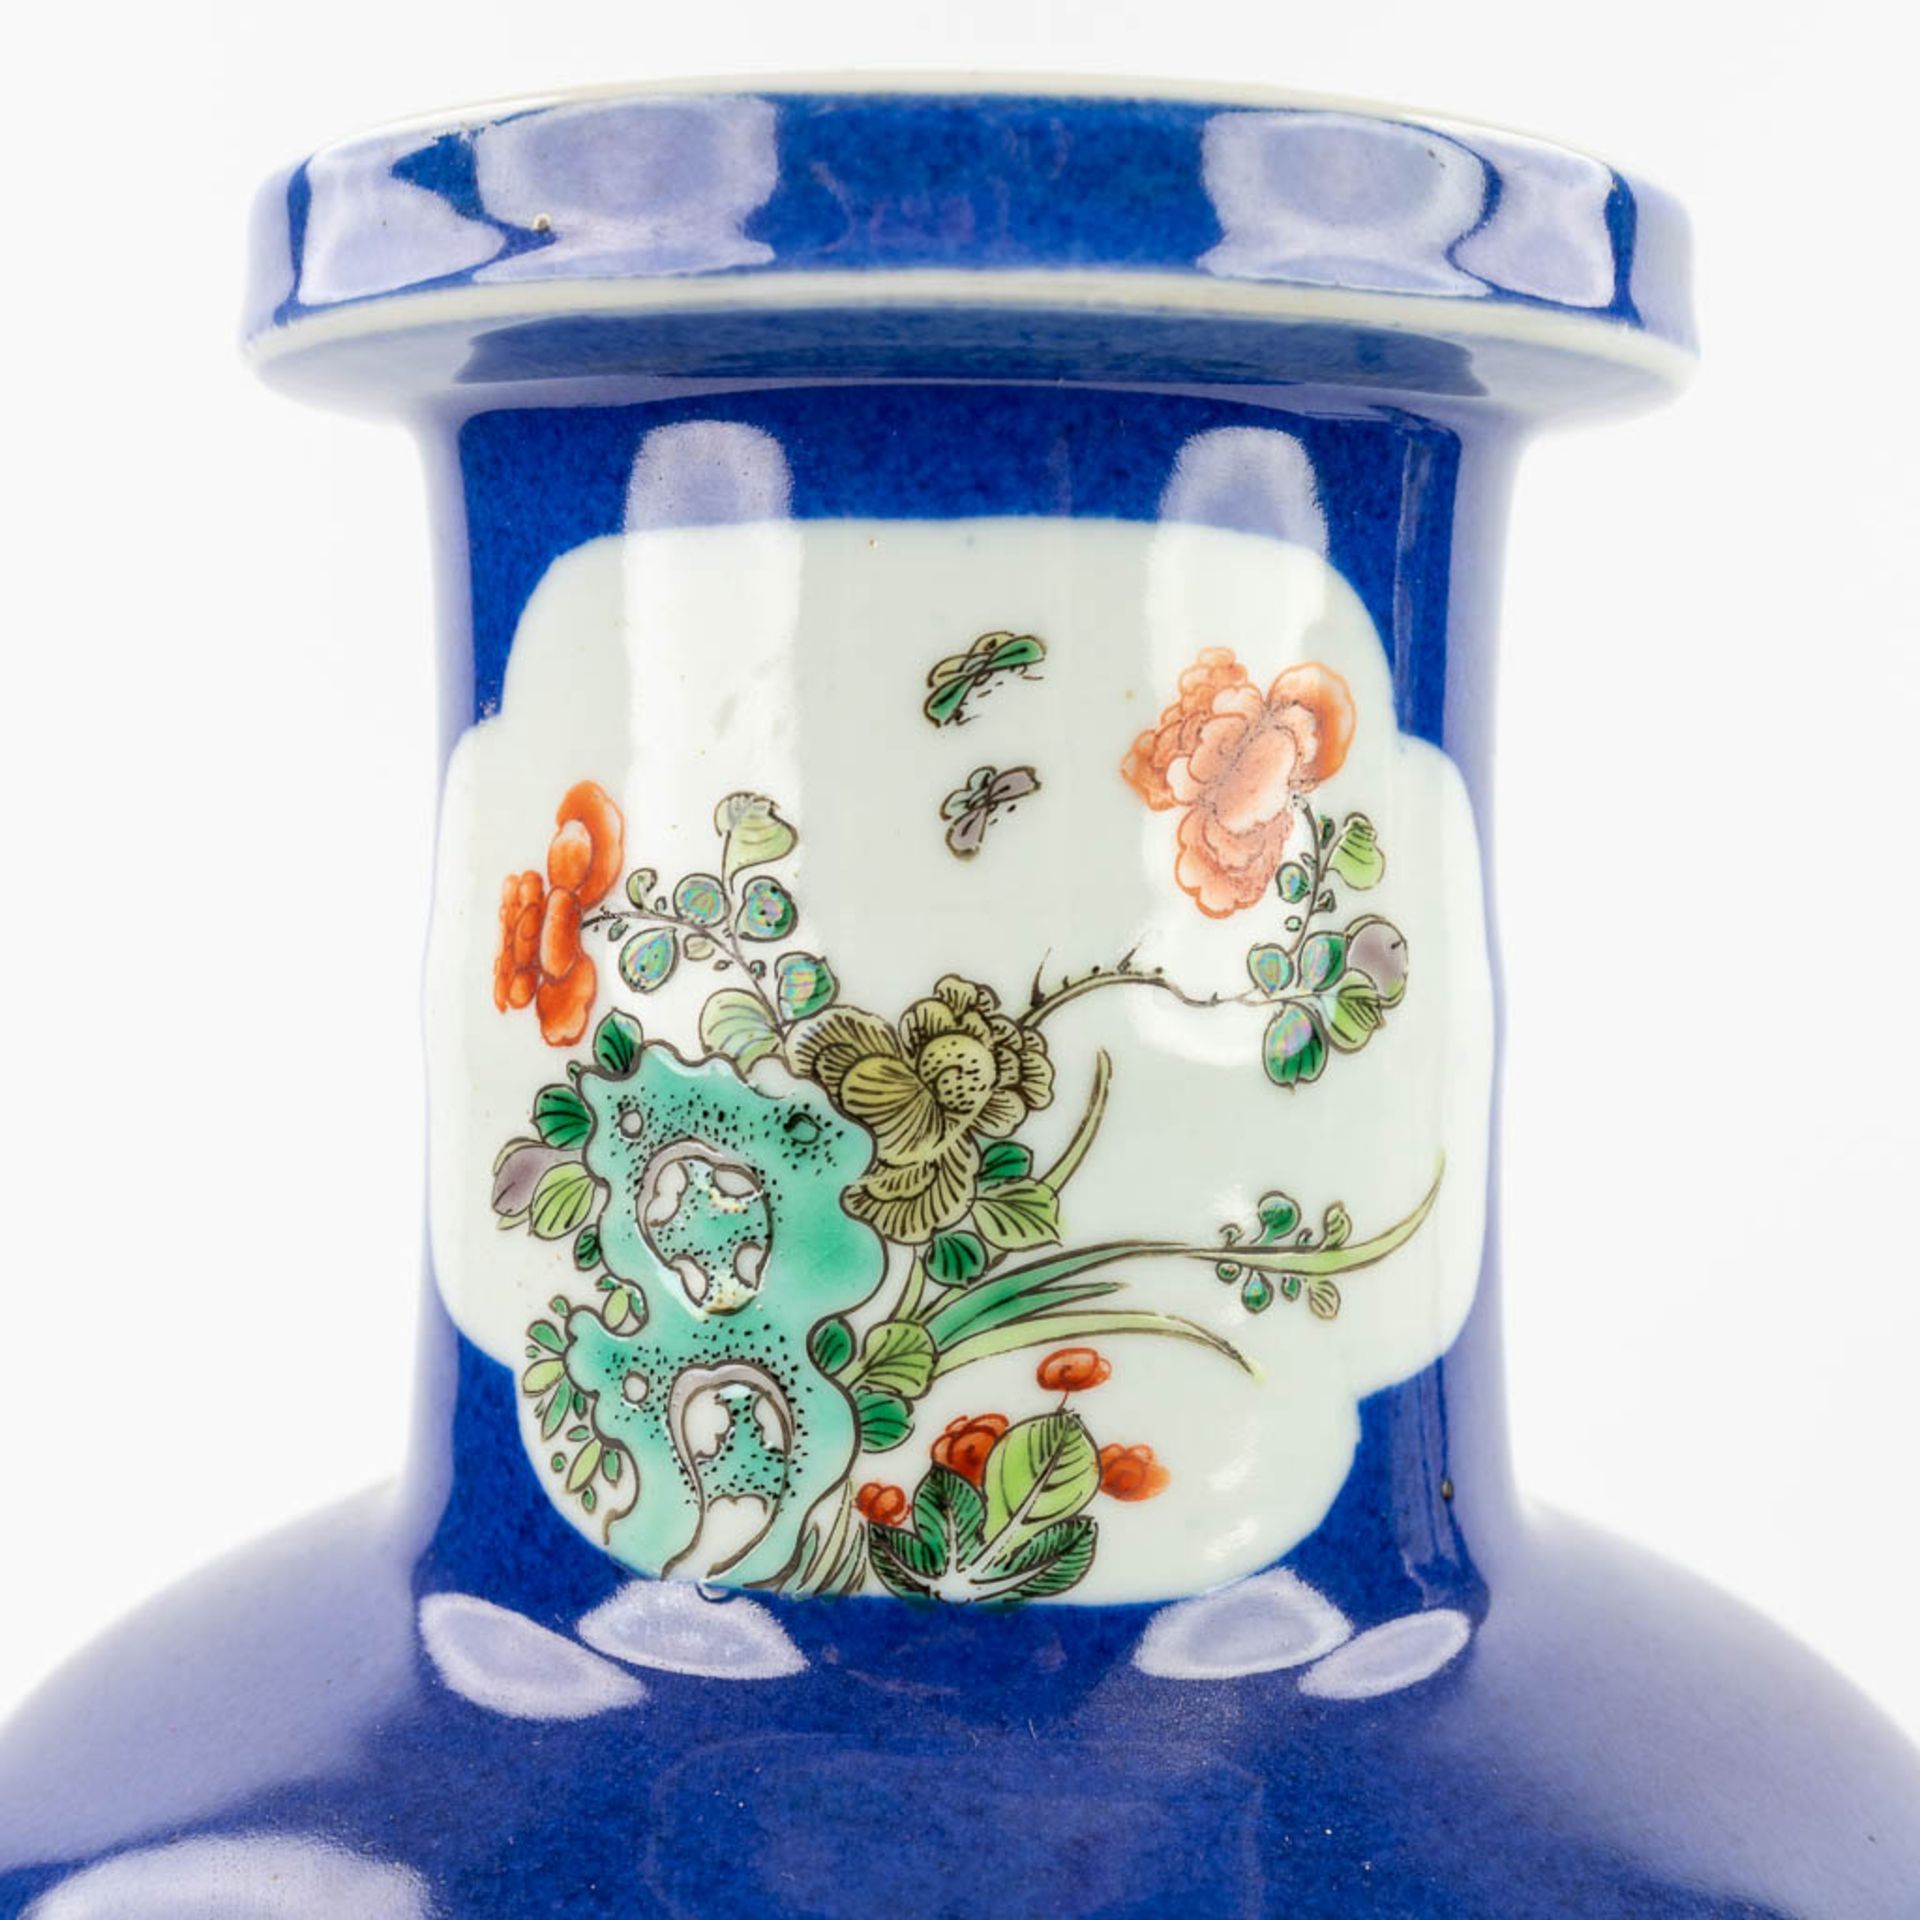 A pair of Chinese vases, decorated with fauna and flora. 20th C. (H:45 x D:18 cm) - Image 11 of 13